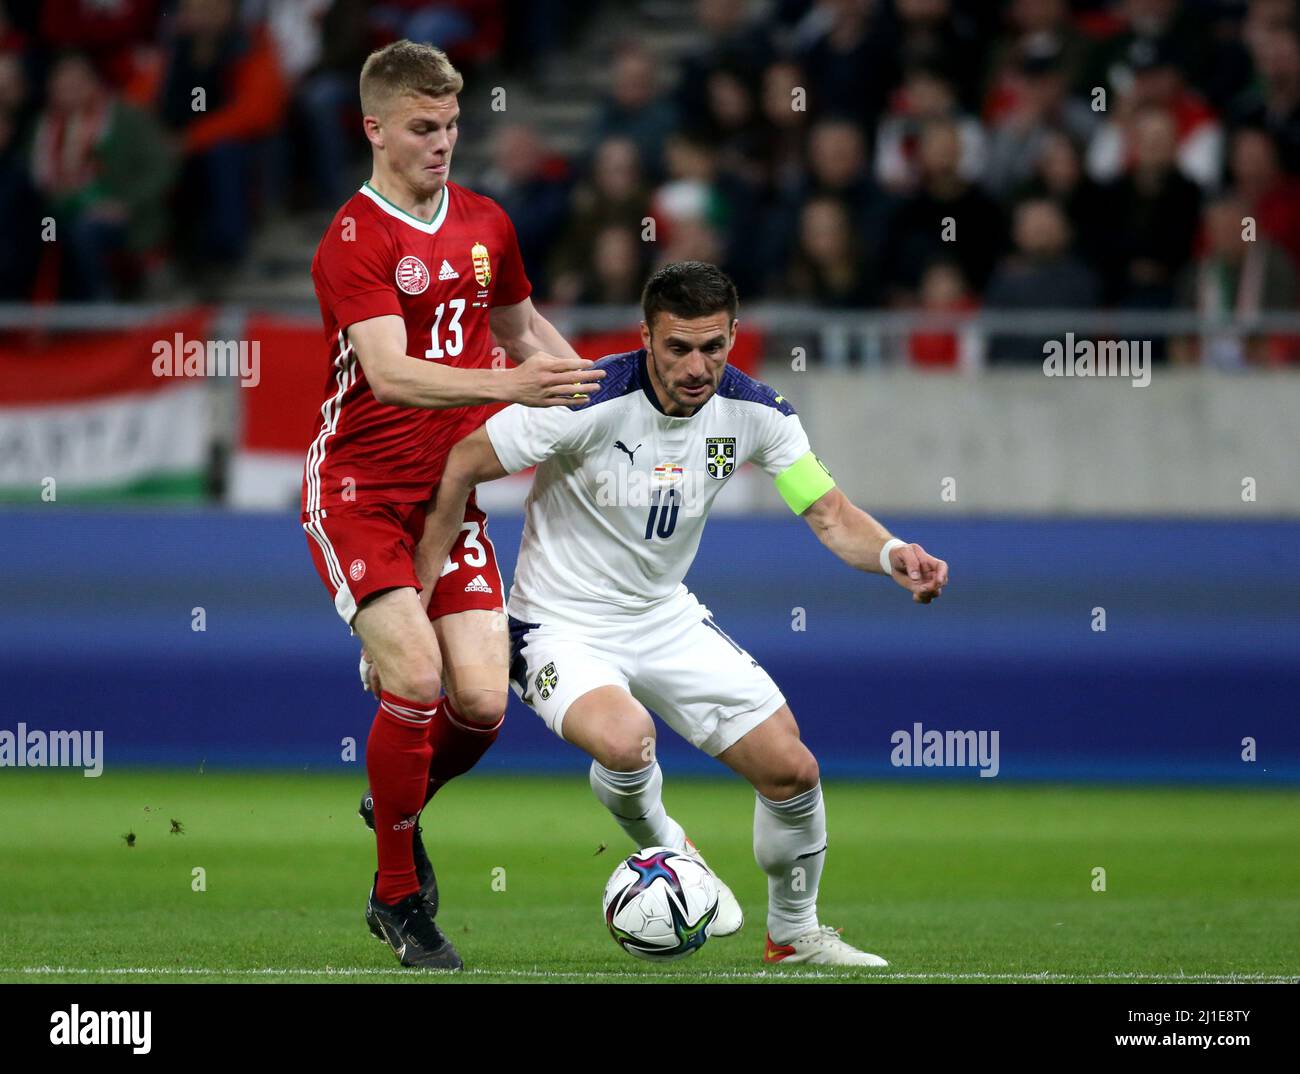 BUDAPEST, HUNGARY - MARCH 24: Dusan Tadic of Serbia competes for the ball with Andras Schafer of Hungary ,during the international friendly match between Hungary and Serbia at Puskas Arena on March 24, 2022 in Budapest, Hungary. (Photo by MB Media) Stock Photo